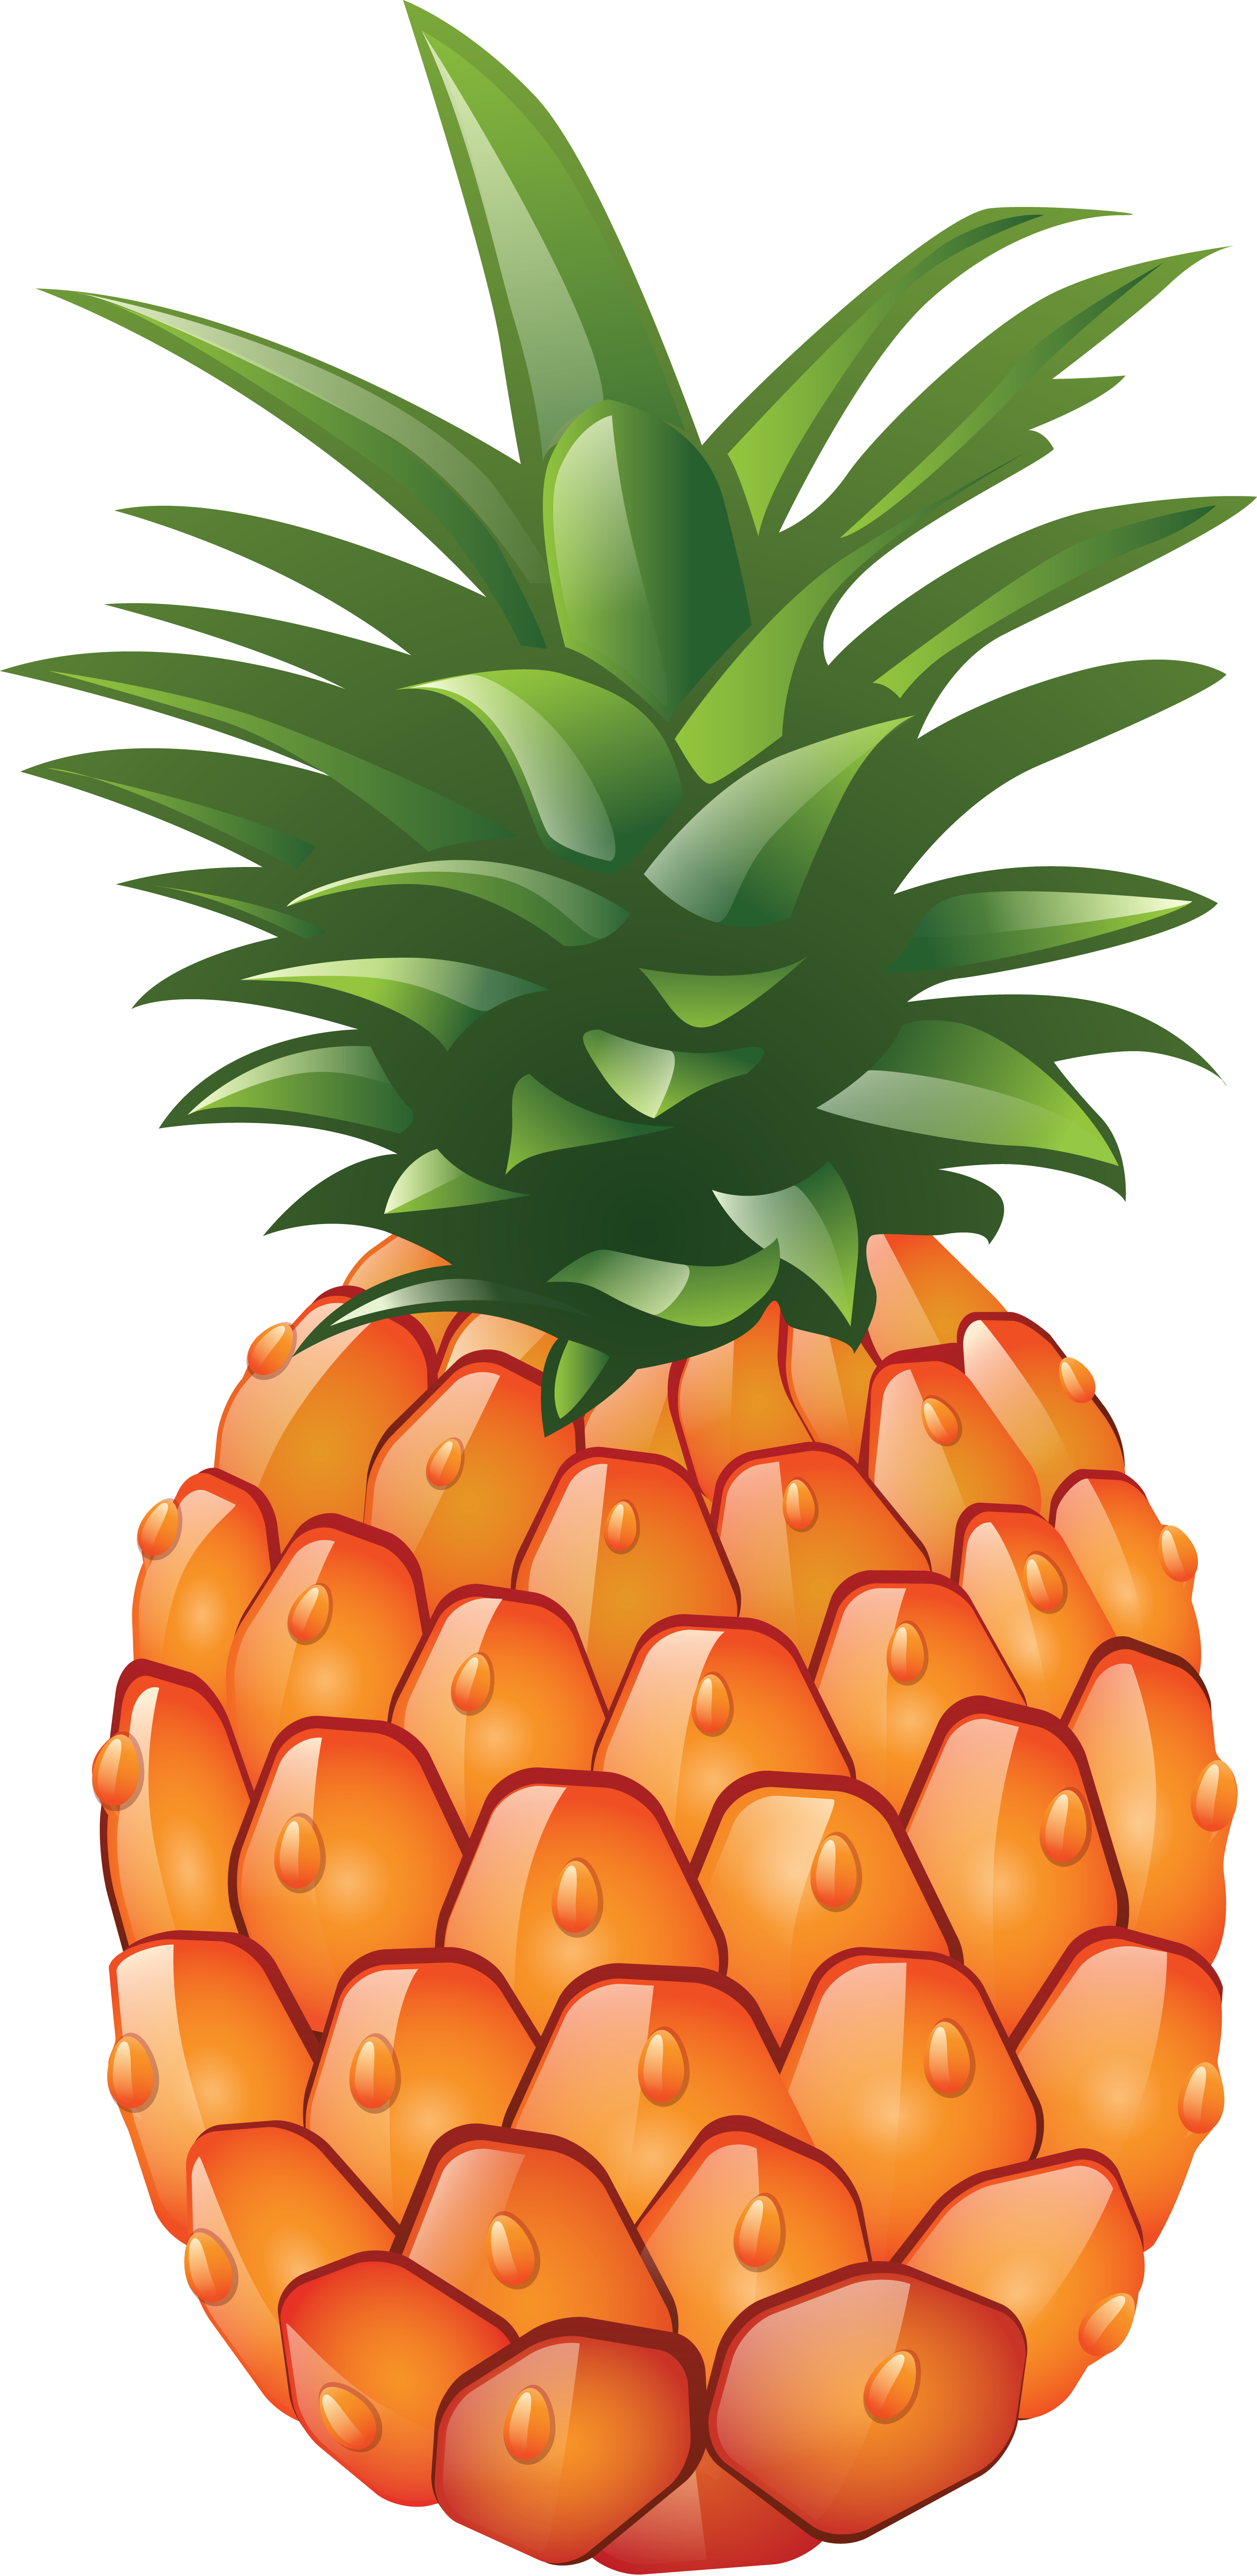 Png image free download. 1 clipart pineapple